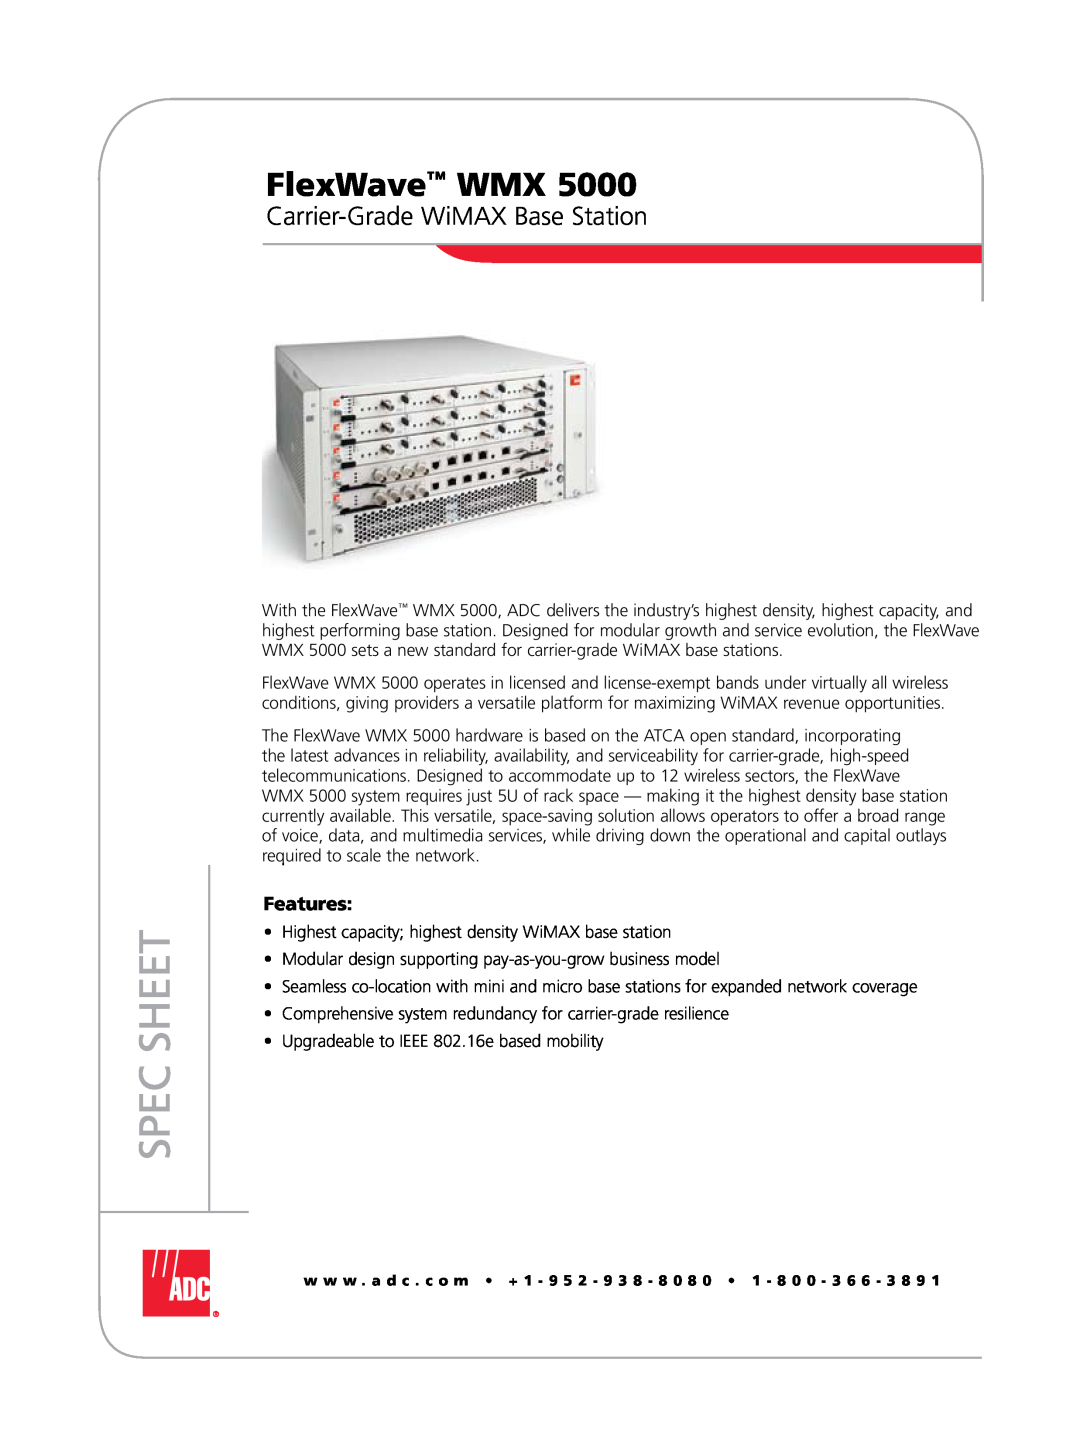 ADC WMX 5000 manual FlexWave WMX, Carrier-Grade WiMAX Base Station, Features, Spec Sheet 